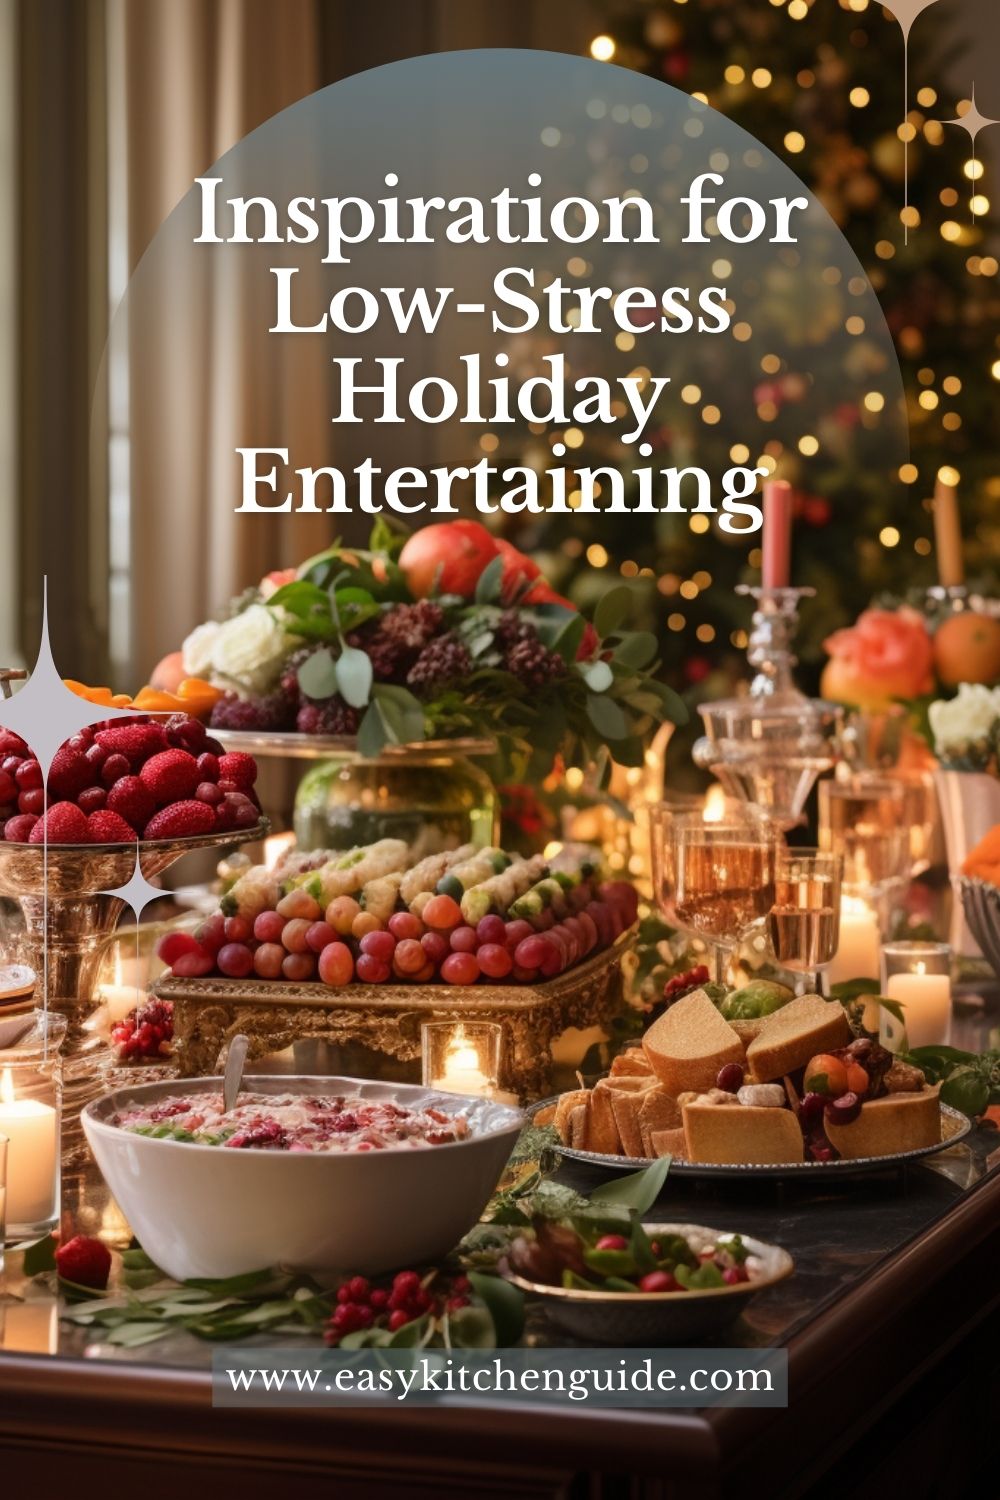 Inspiration-for-Low-Stress-Holiday-Entertaining